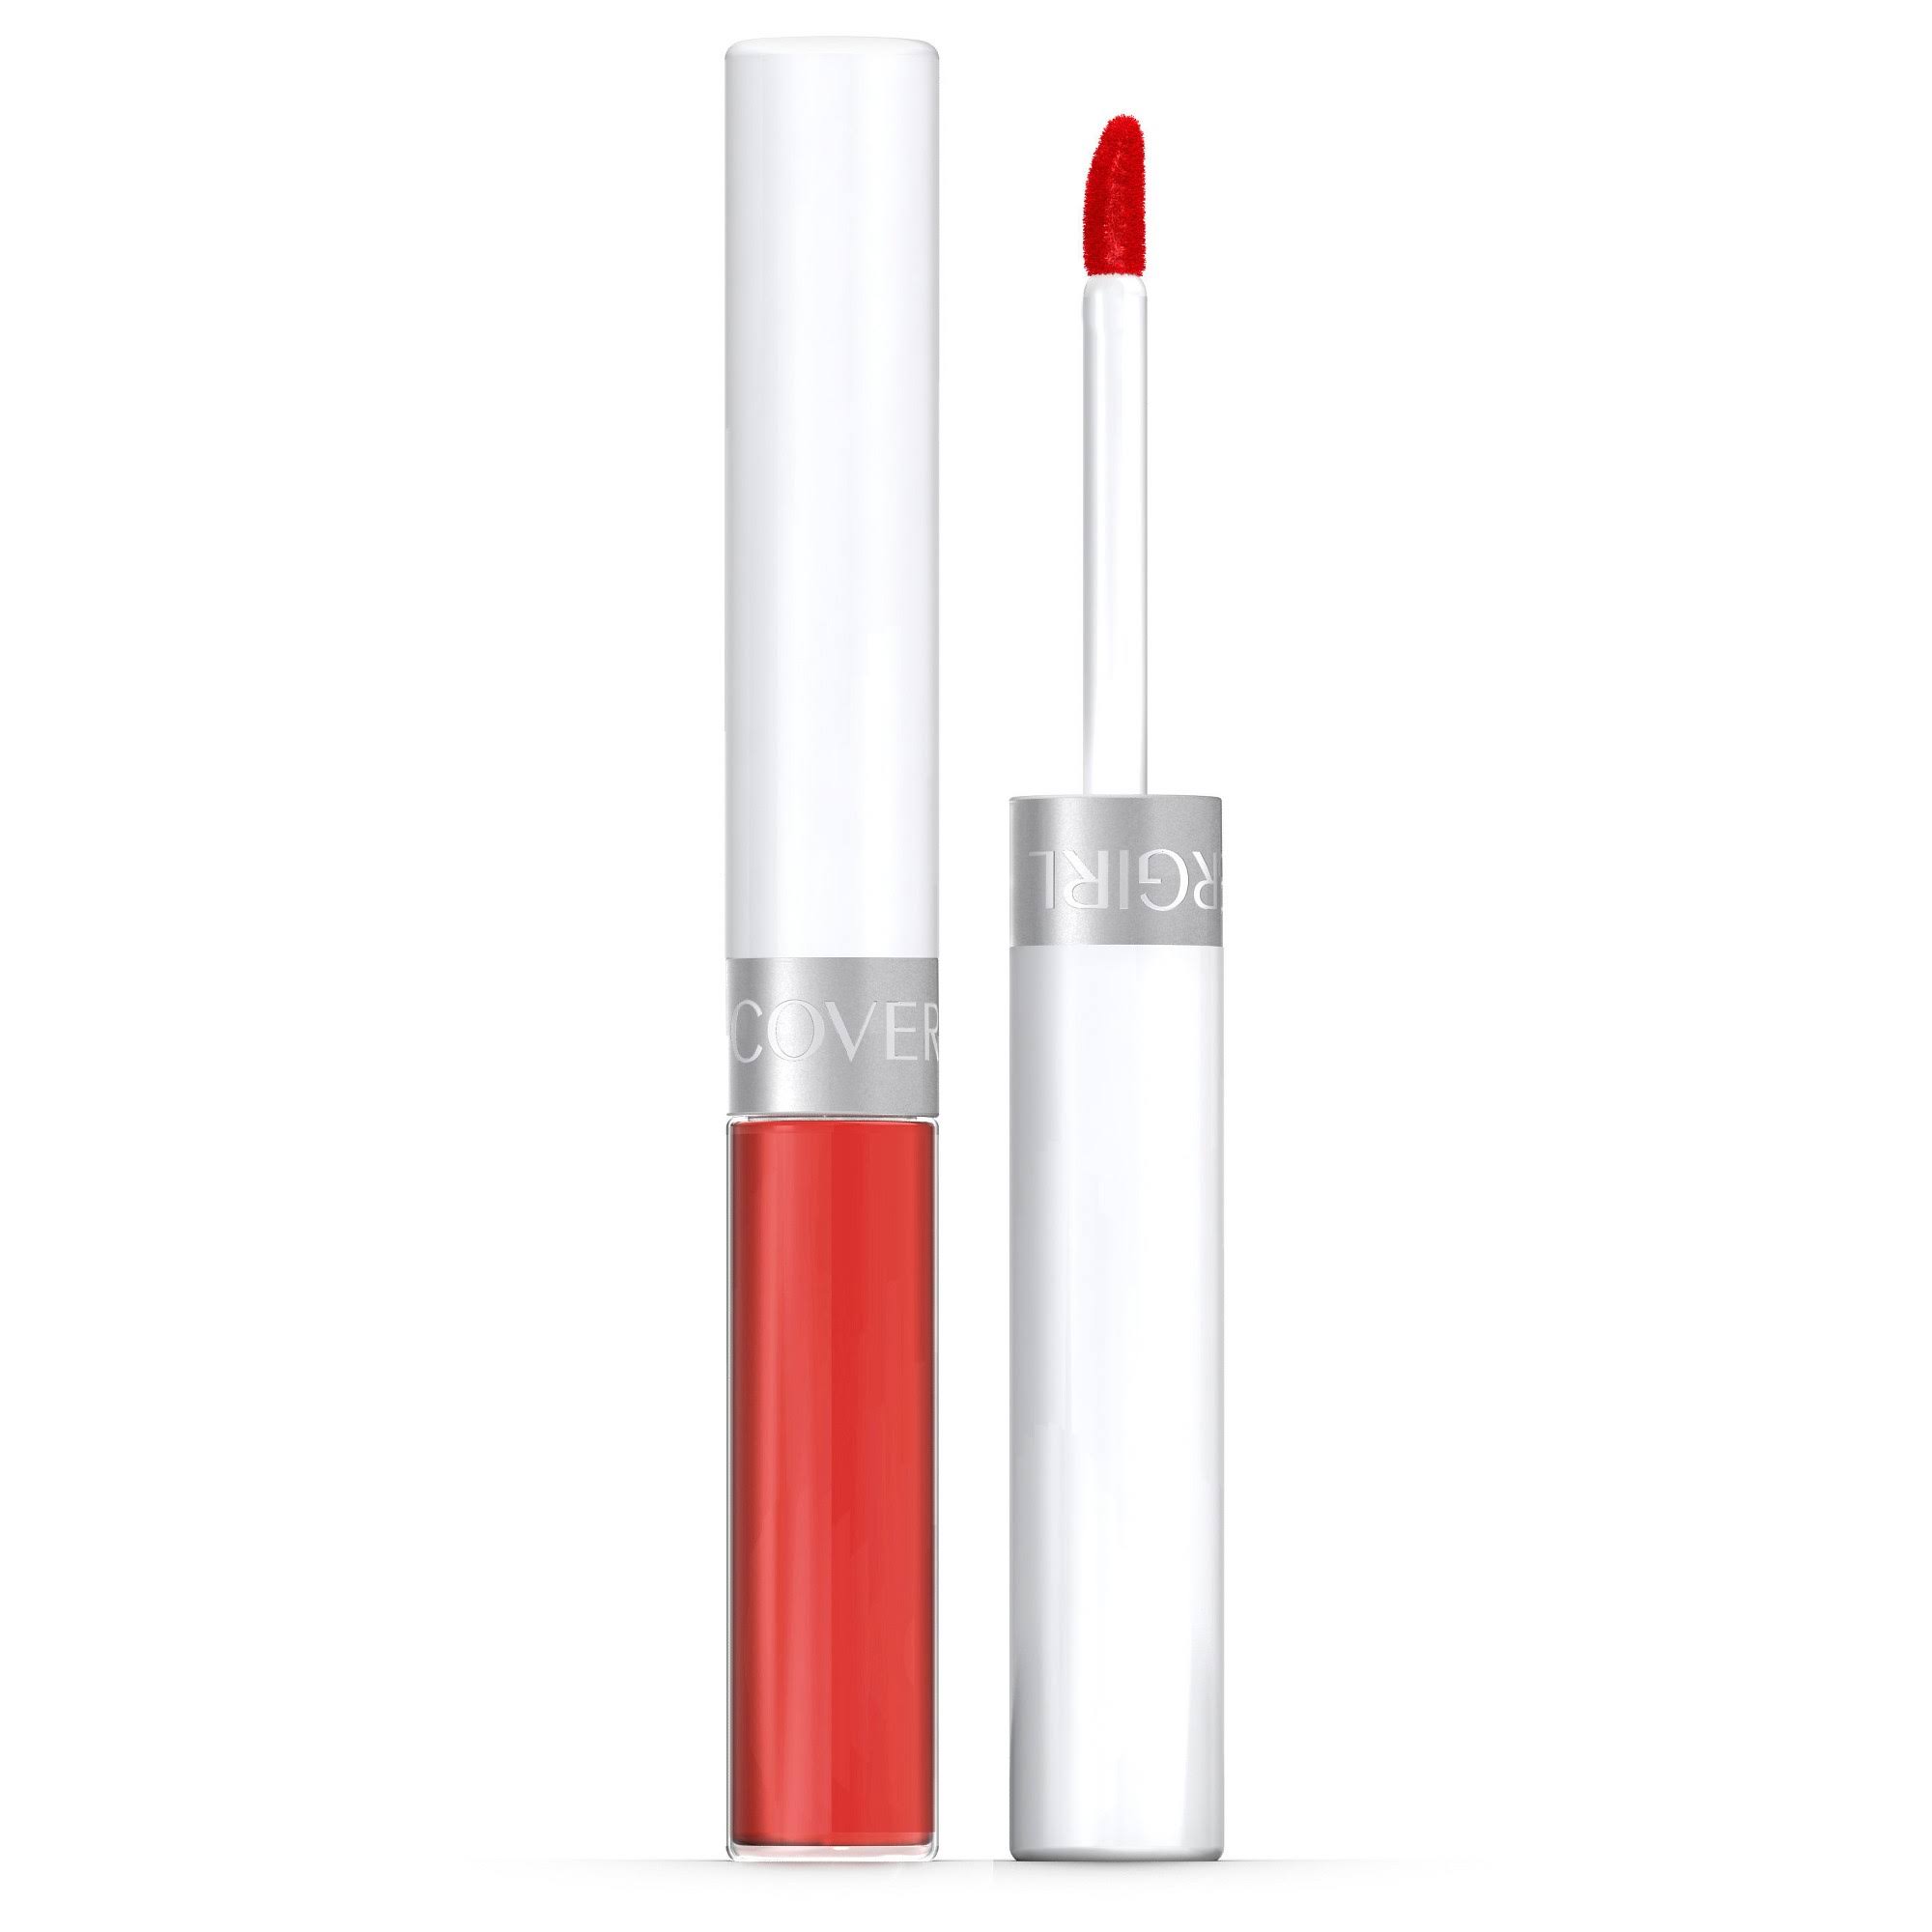 Covergirl Outlast All-Day Custom Reds Lip Color - Custom Coral 800, 0.13oz